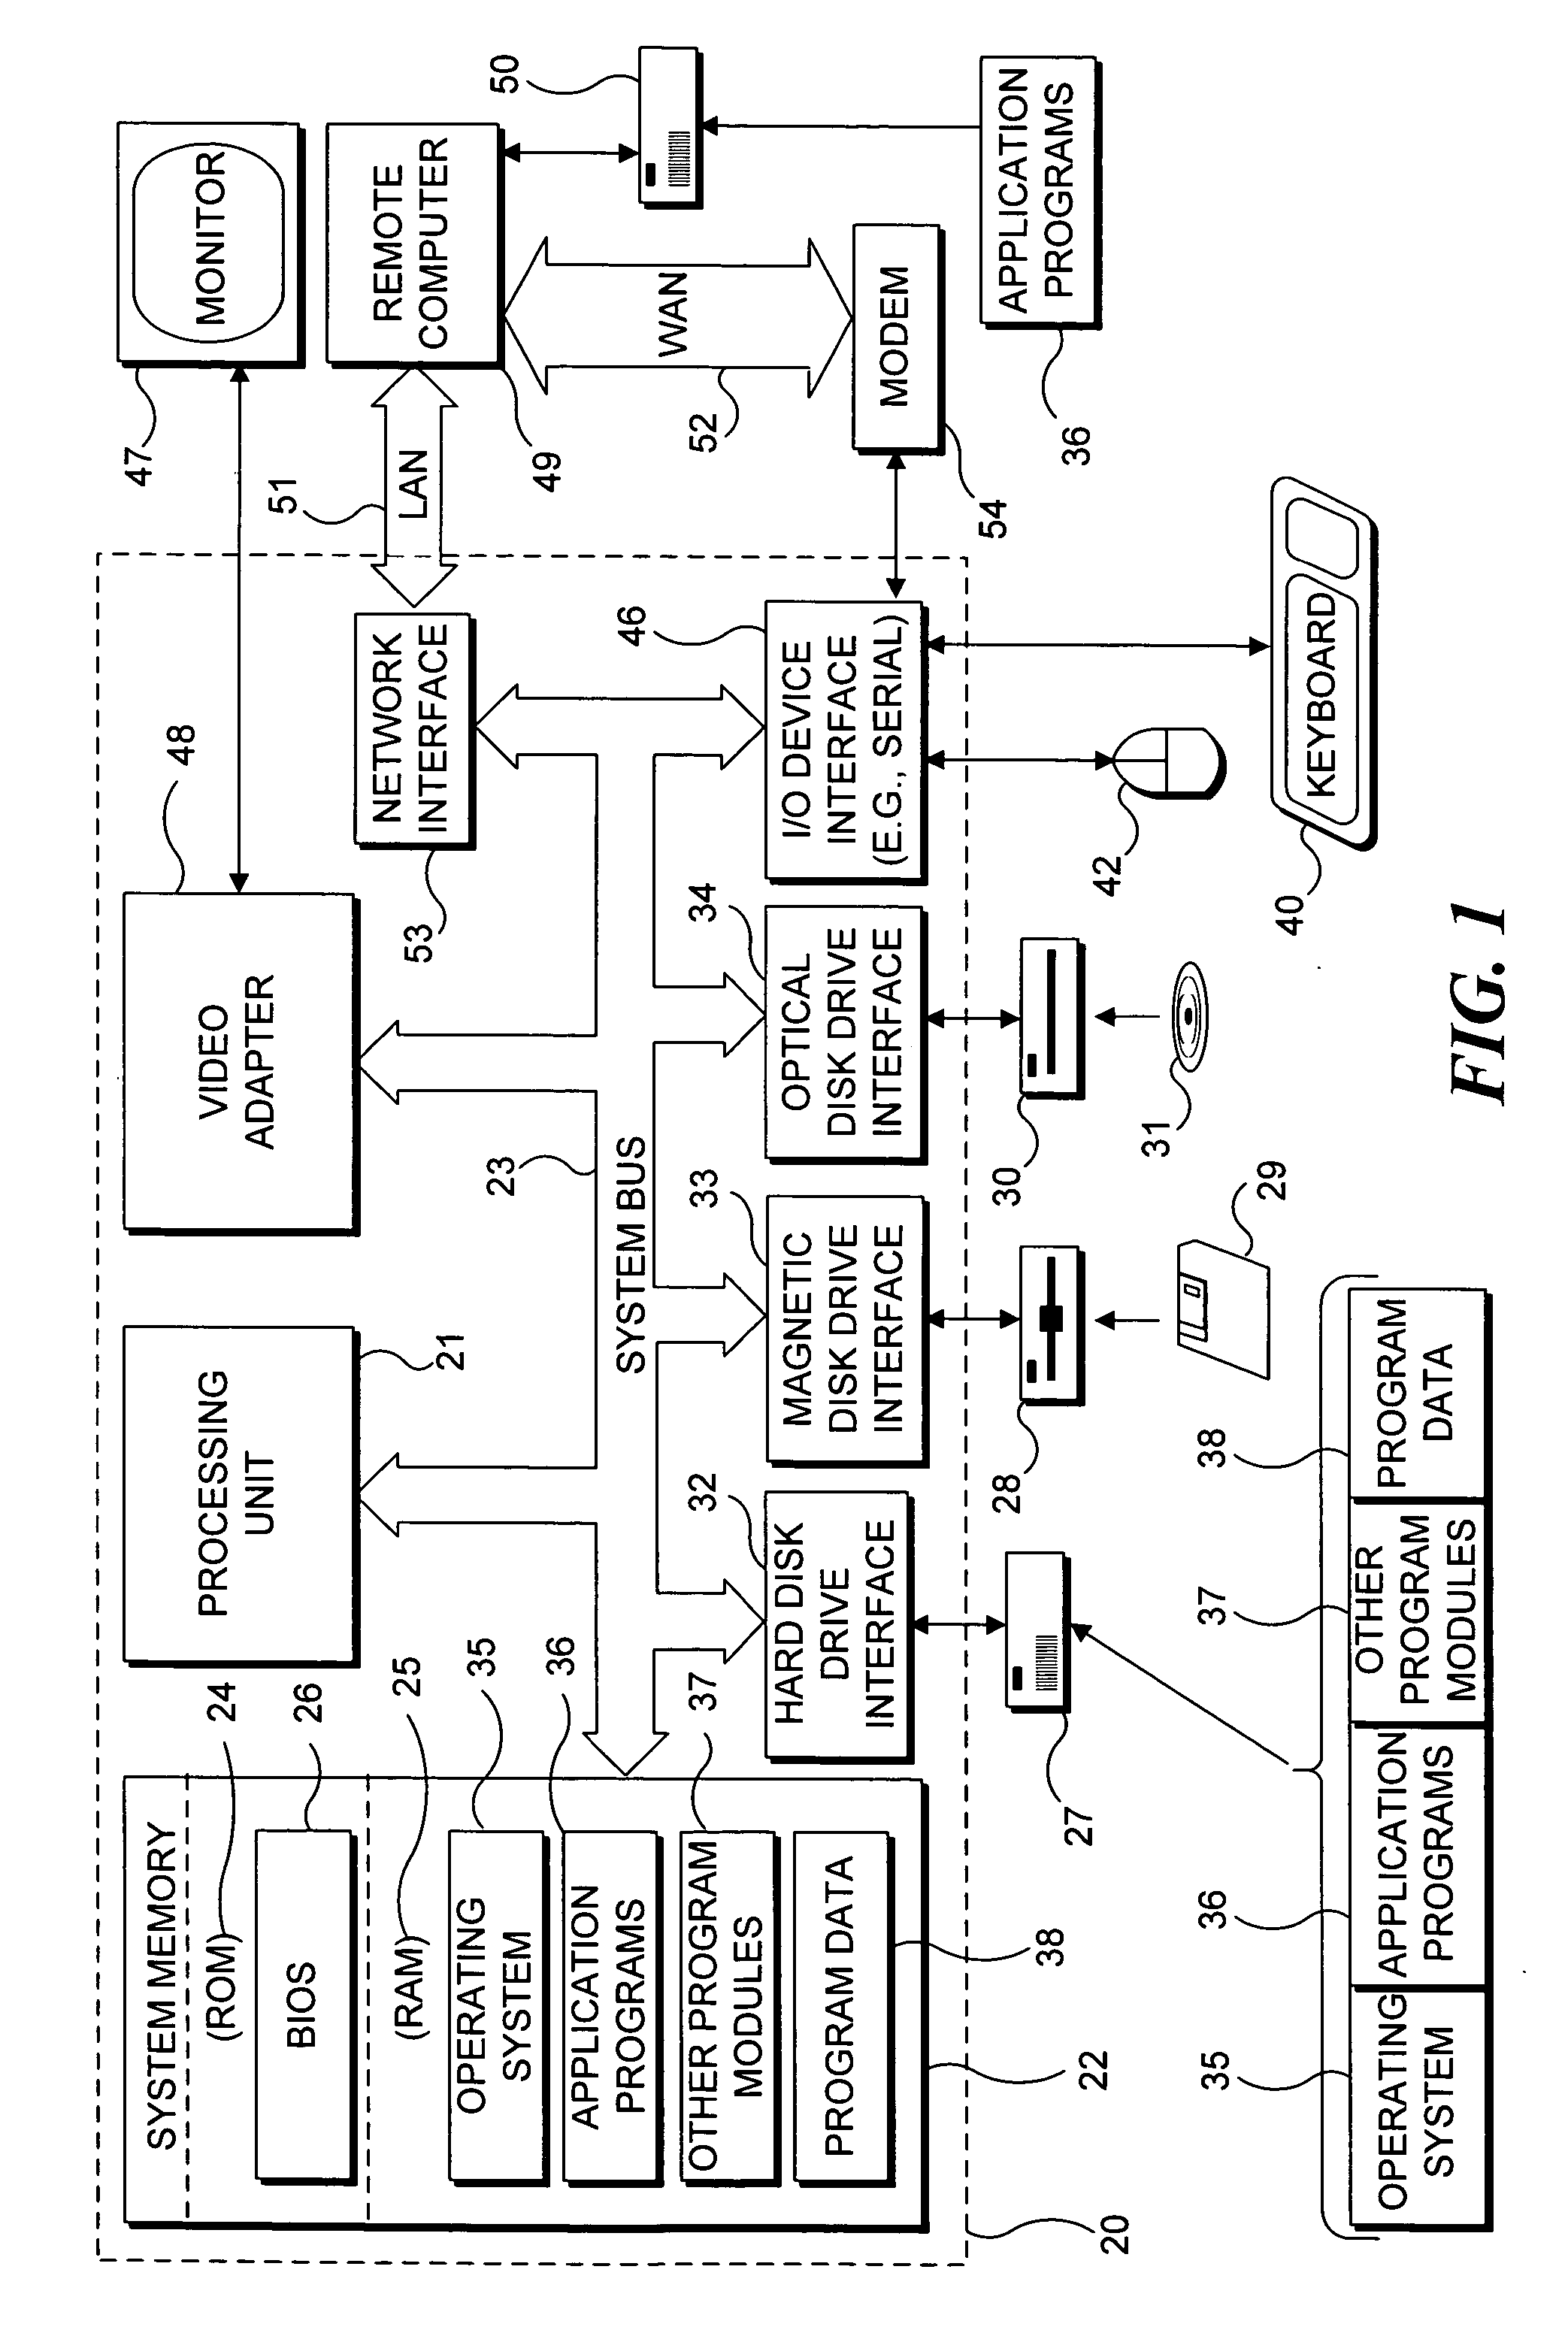 Restricting the display of information with a physical object